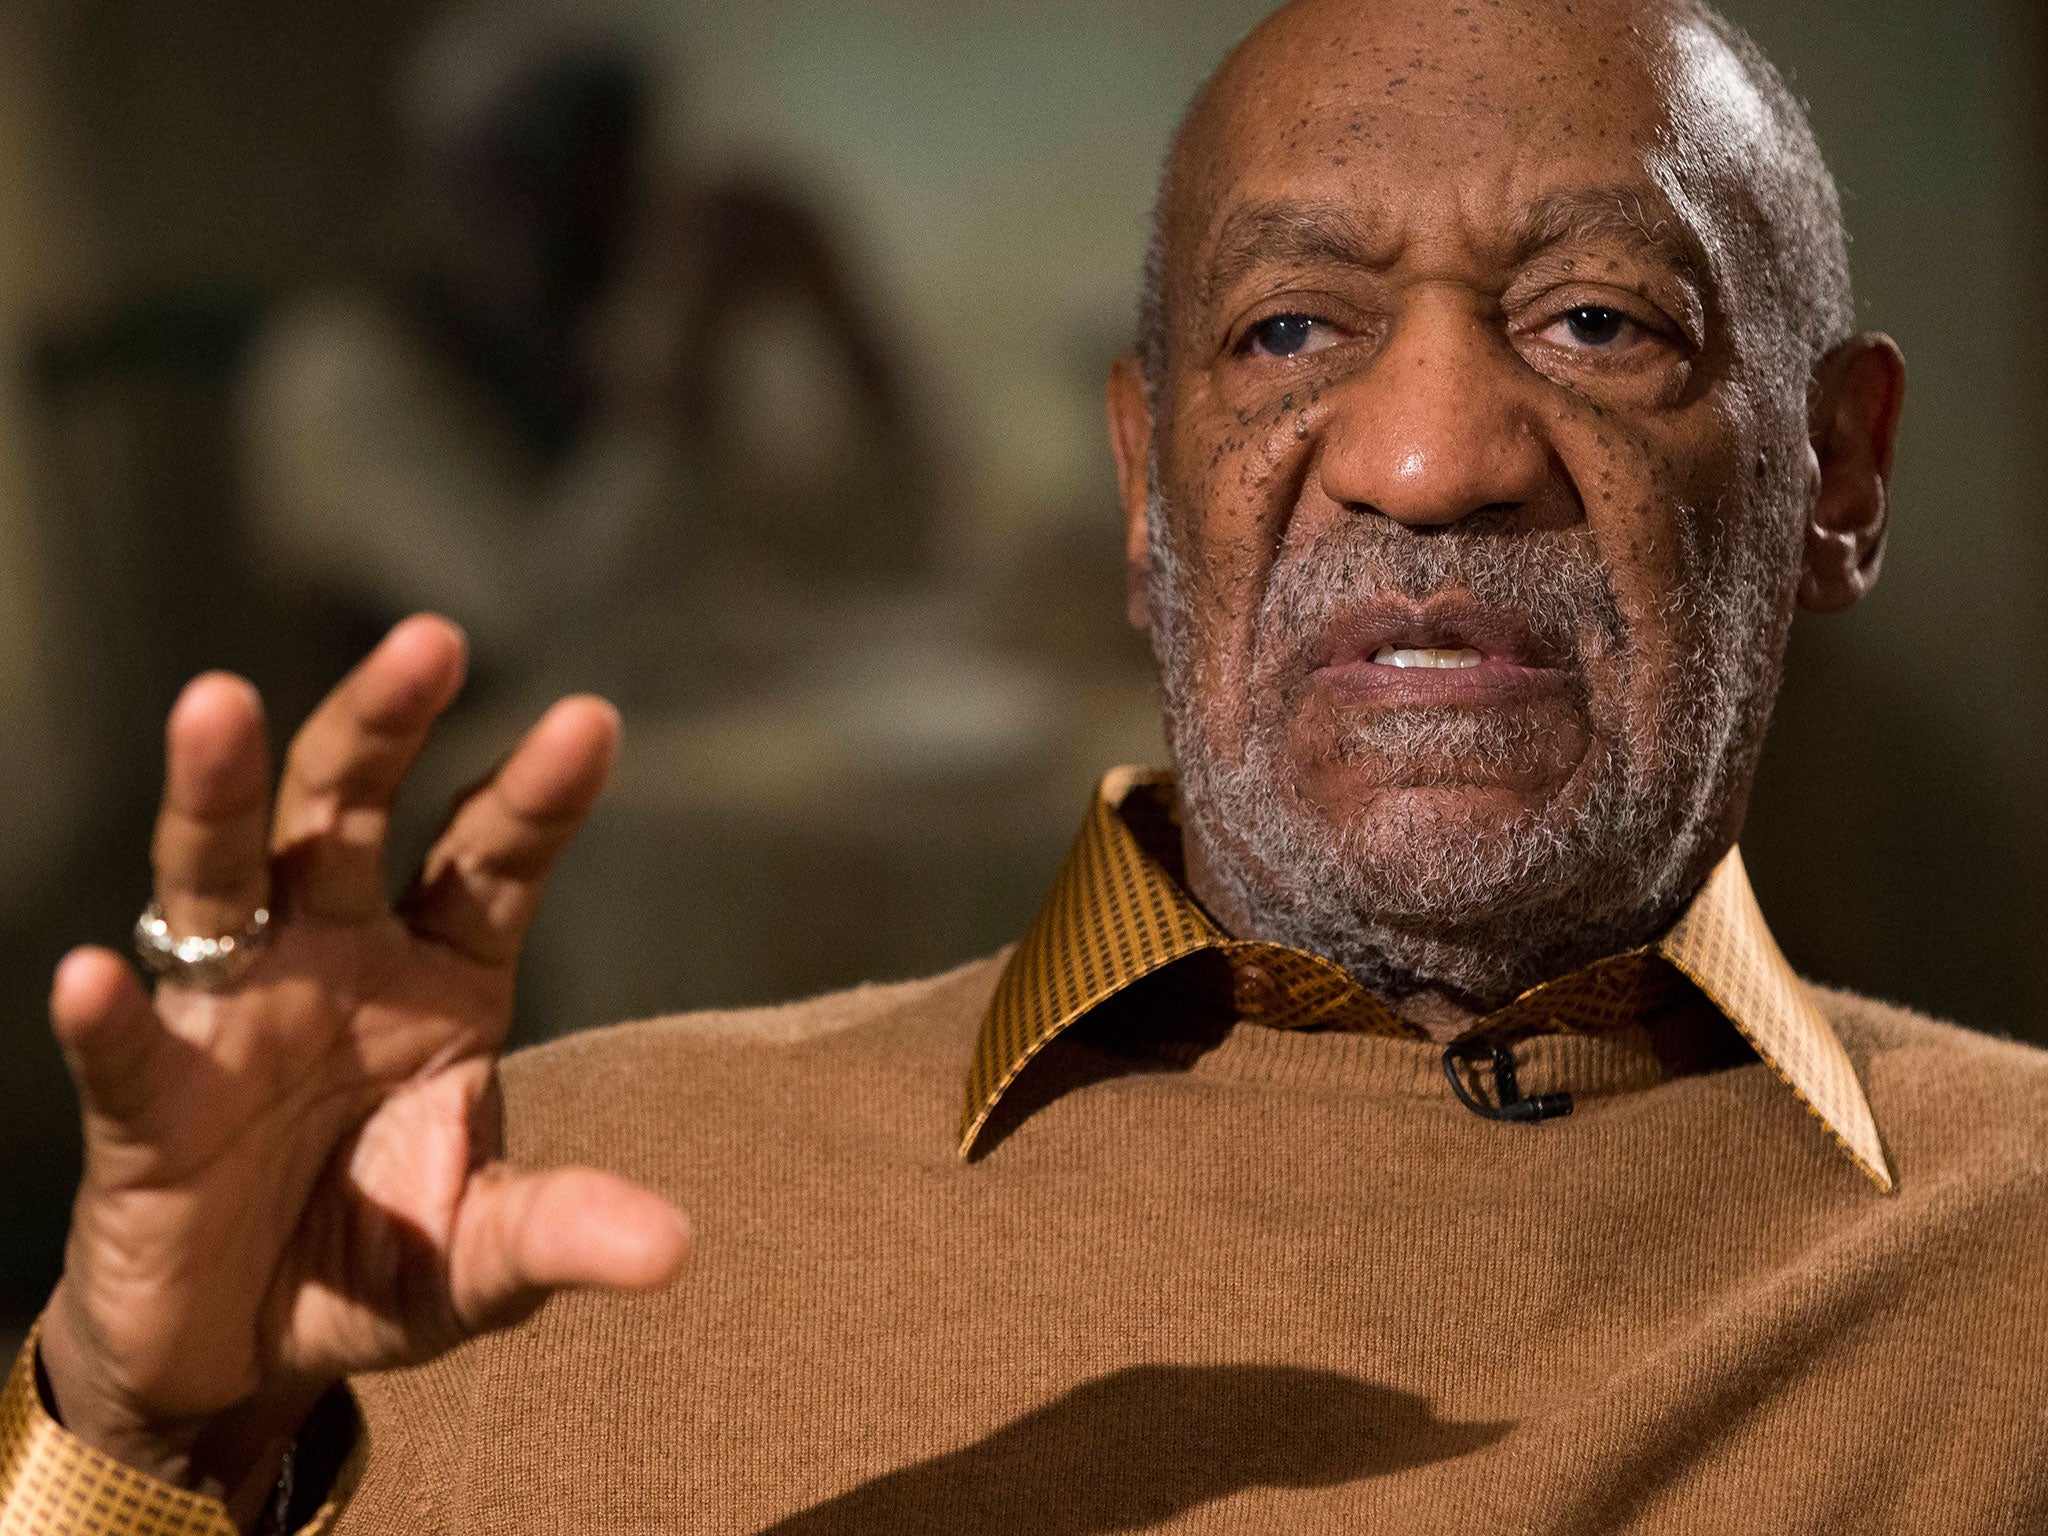 Bill Cosby breaks his silence over sexual assault allegations